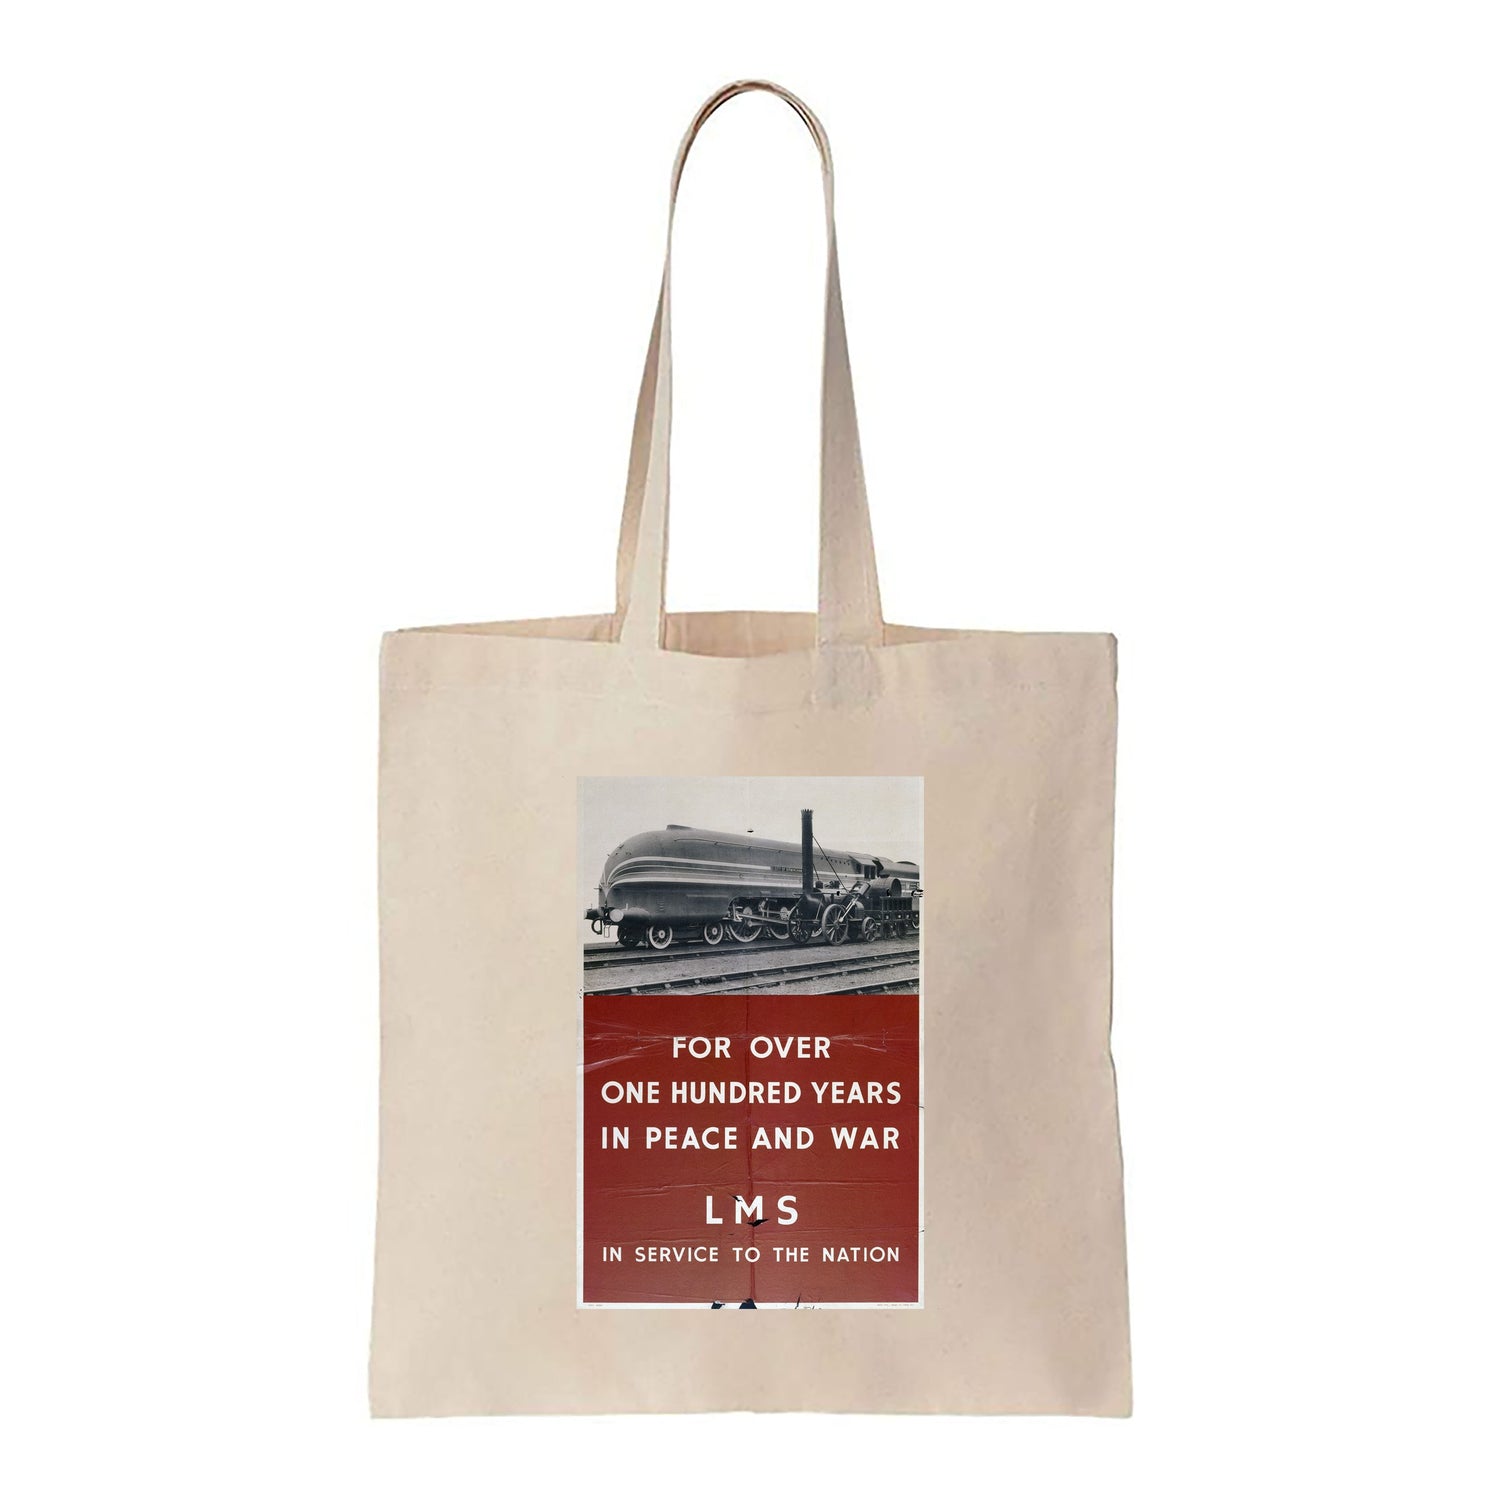 In Service To The Nation, LMS - Canvas Tote Bag